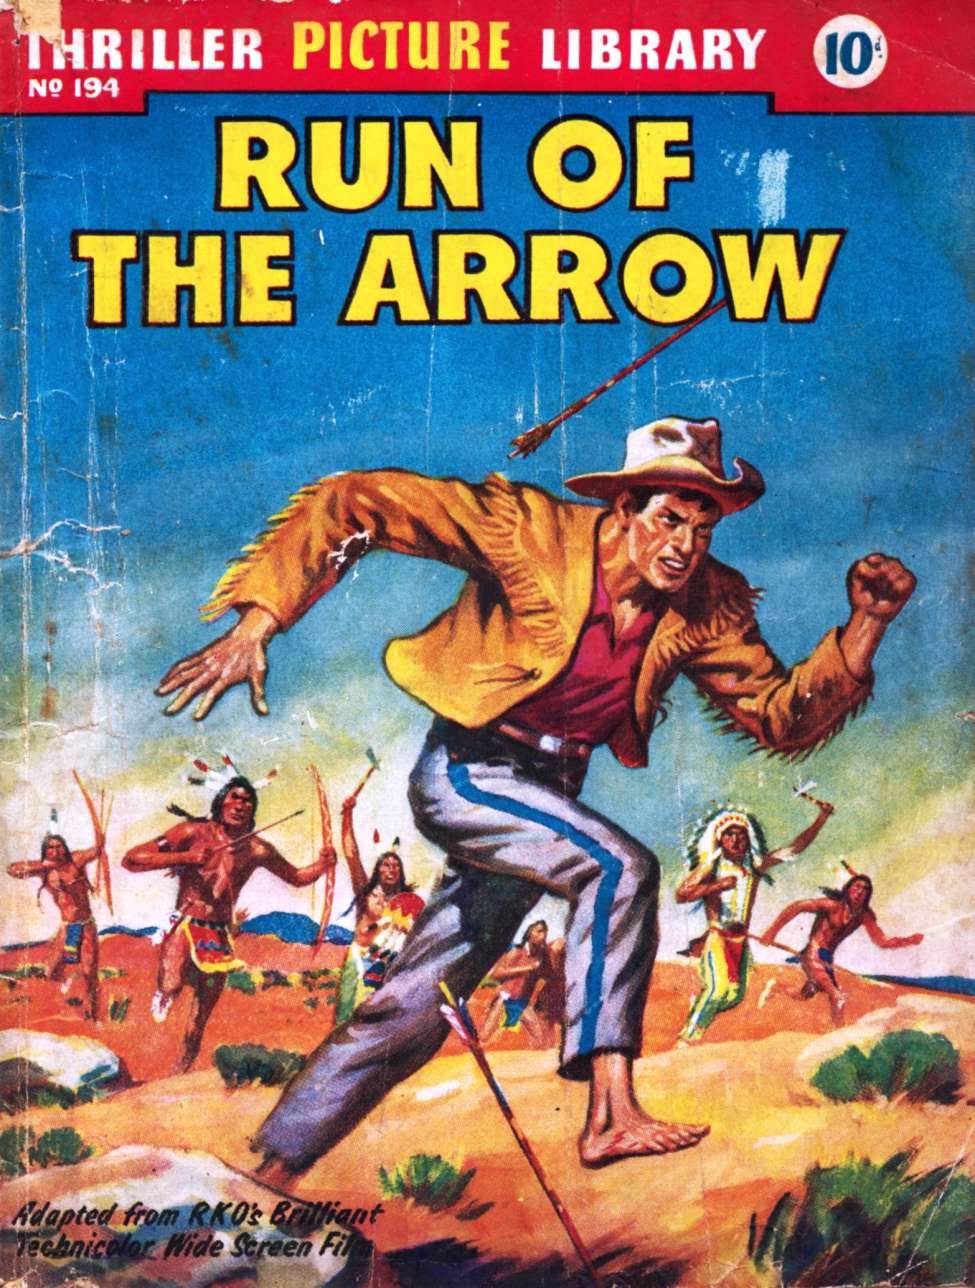 Book Cover For Thriller Picture Library 194 - Run of the Arrow